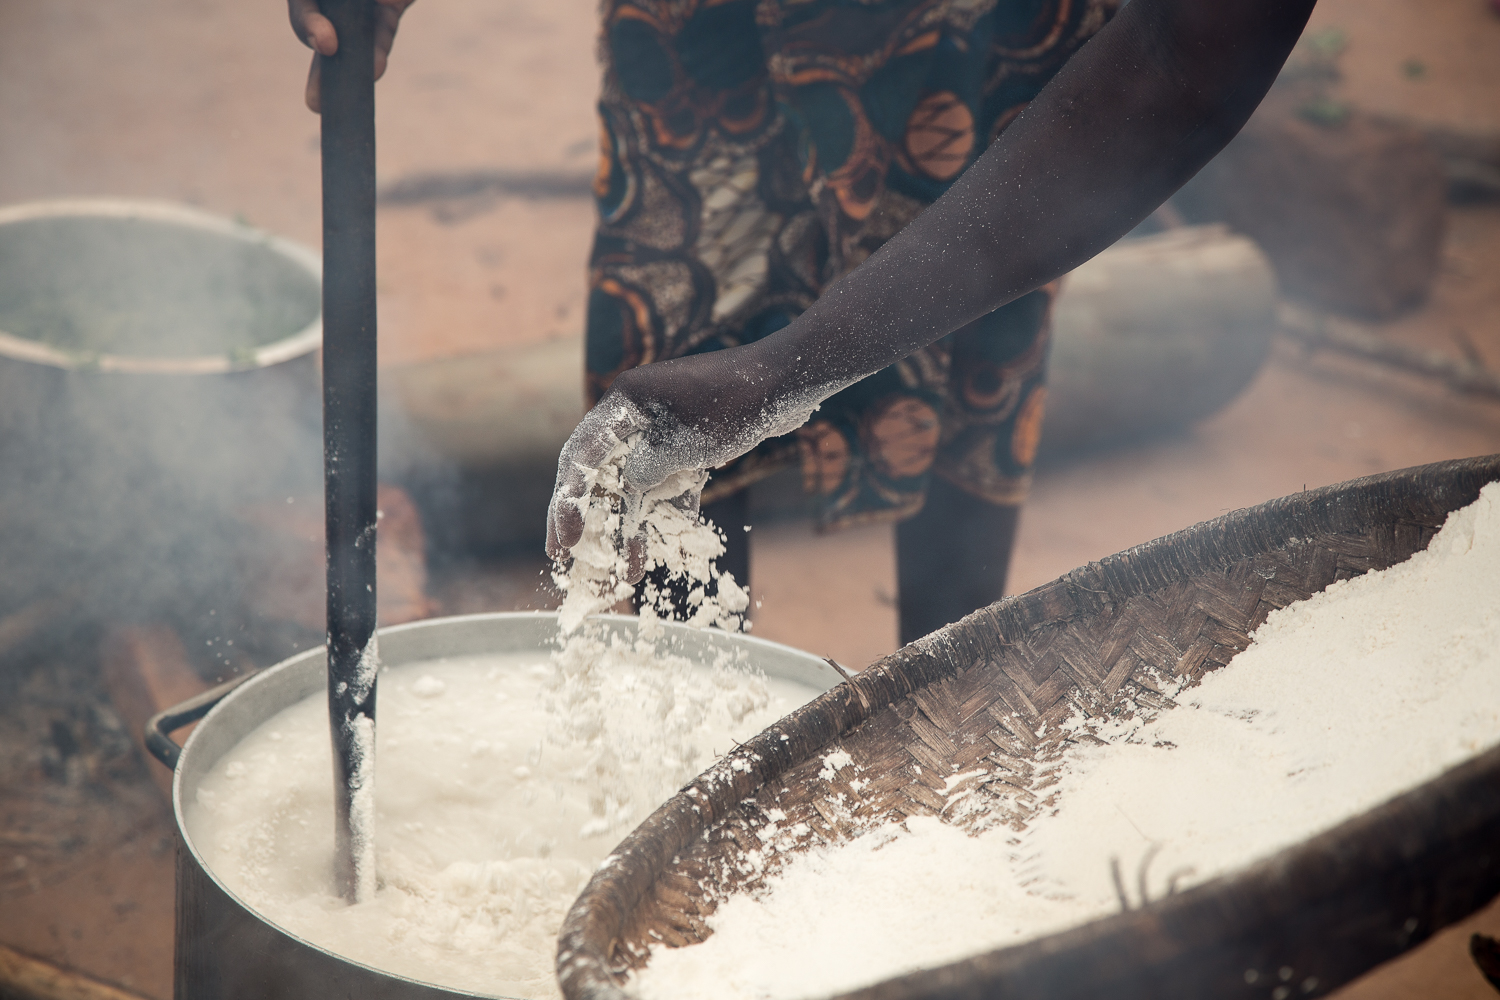  The maize flour is integrated into boiling water, cooked, stirred, cooked, etc... until the Nsima is ready to eat. It is hard work, and the smoke from the fire can be overwhelming, so there is a lot of taking turns. 